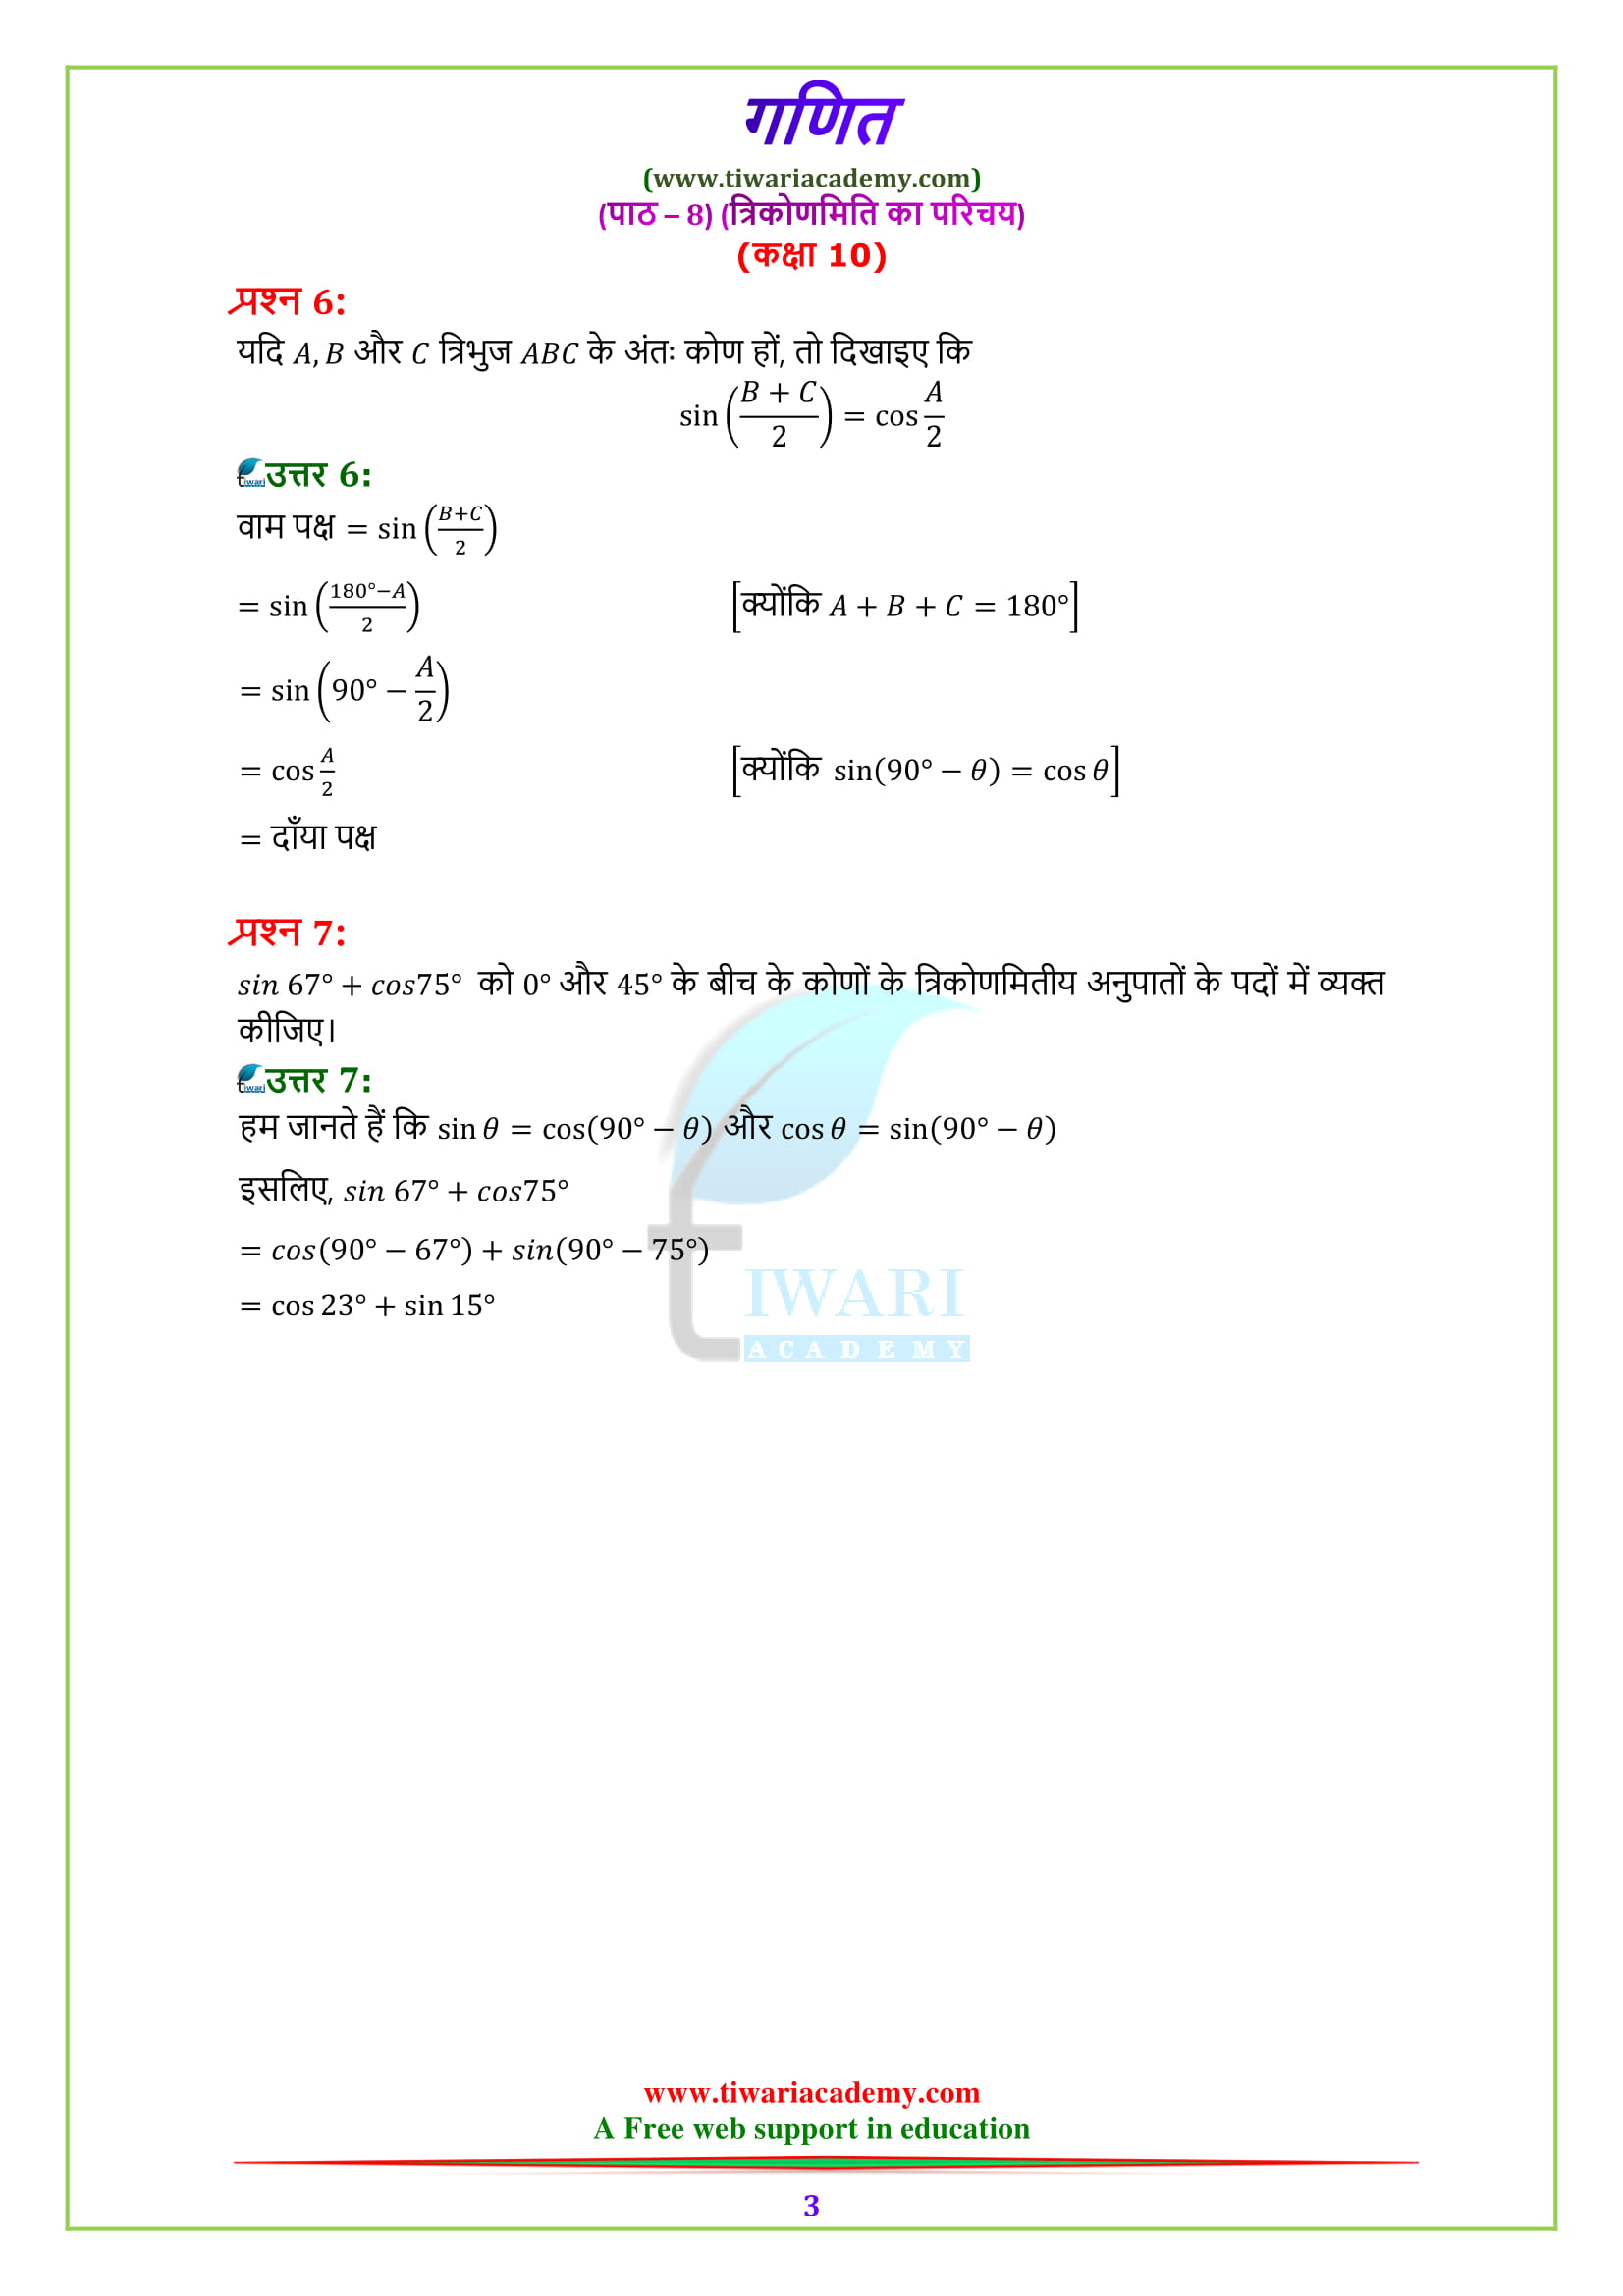 NCERT Solutions for class 10 Maths Chapter 8 Exercise 8.3 in PDF questions 6 and 7